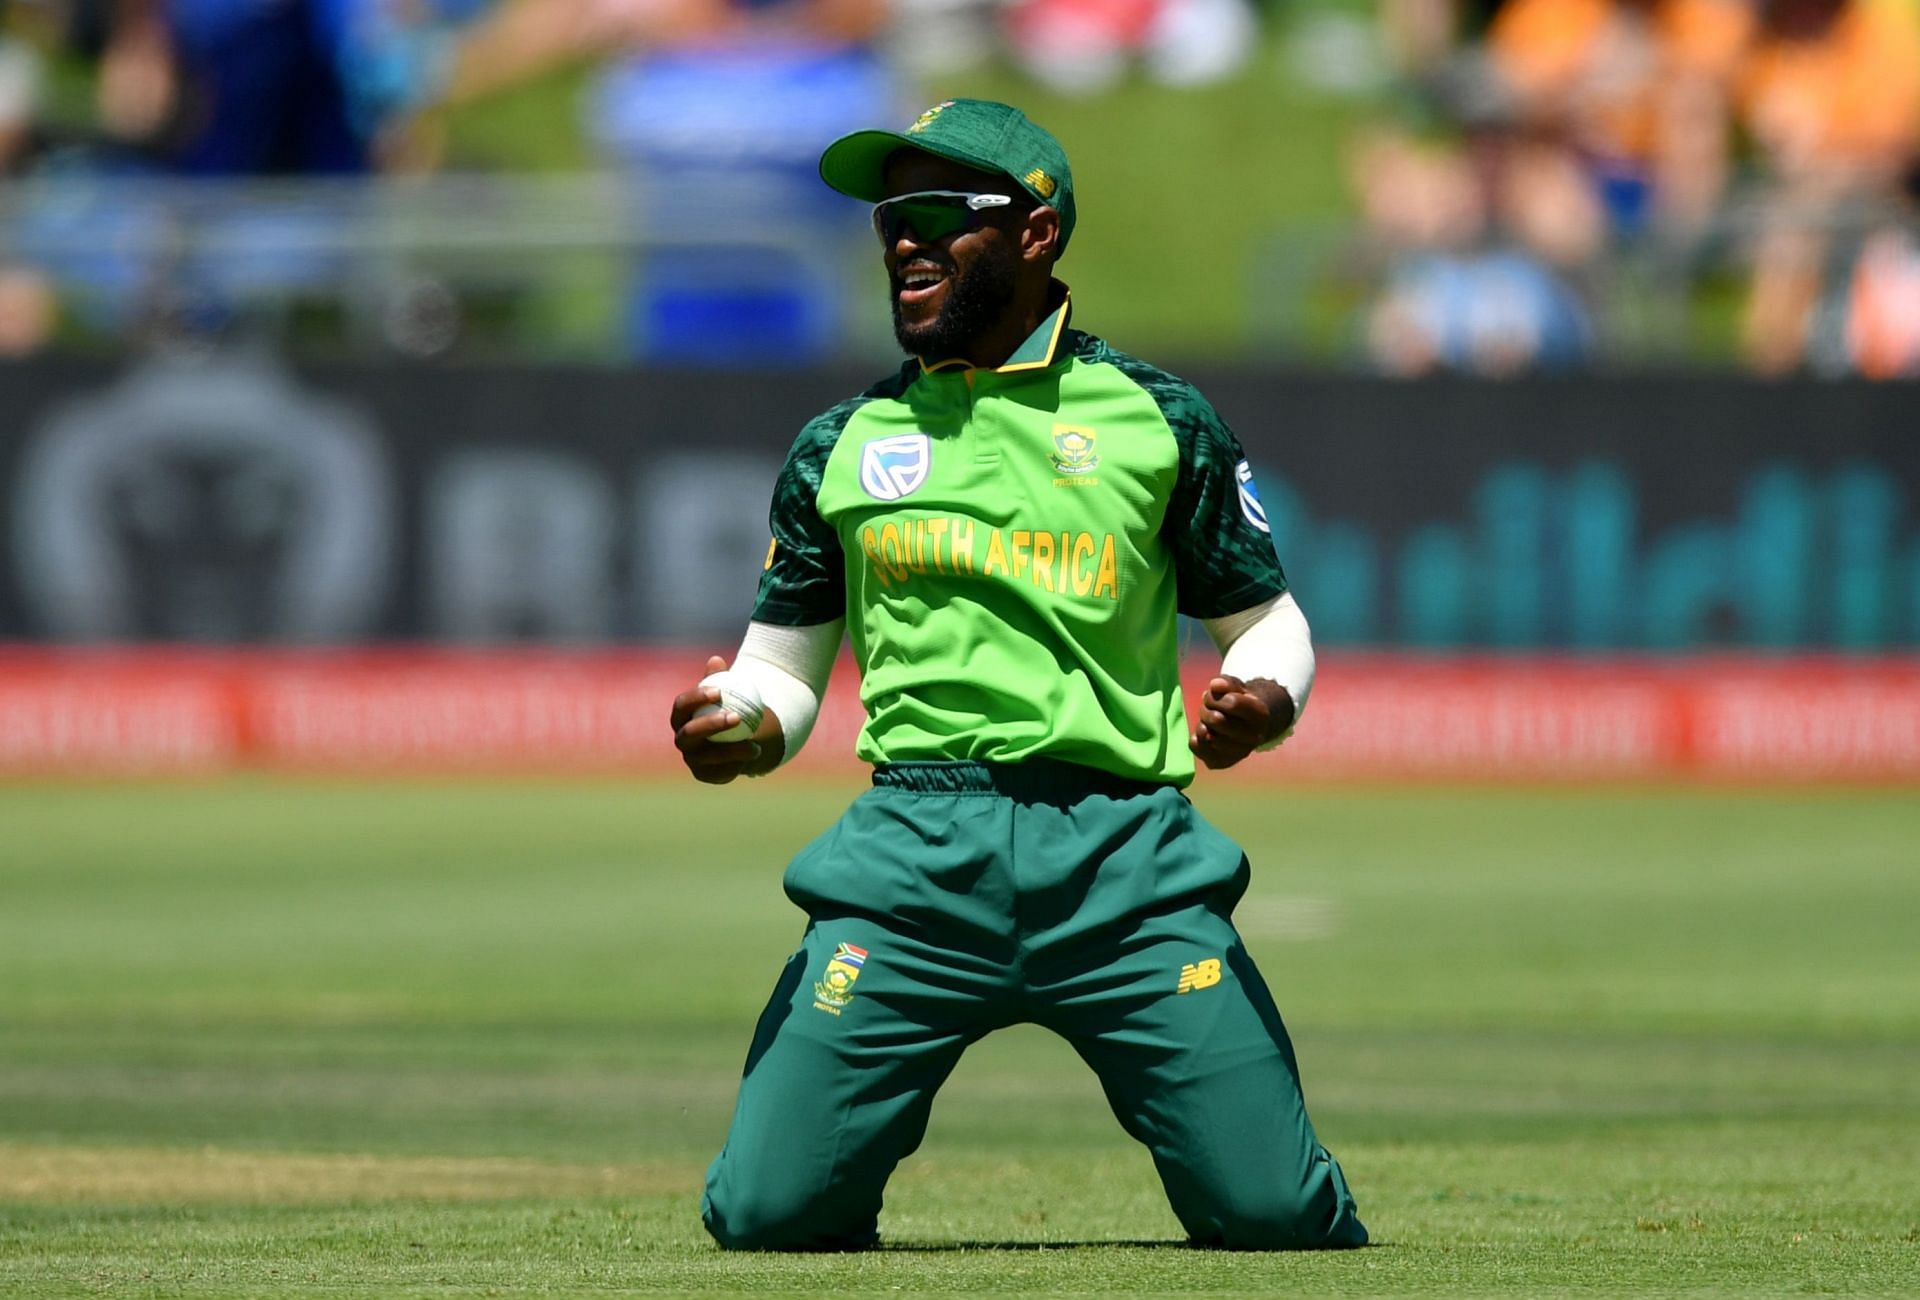 Temba Bavuma will lead South Africa in the 2022 T20 World Cup. (Credits: Twitter)